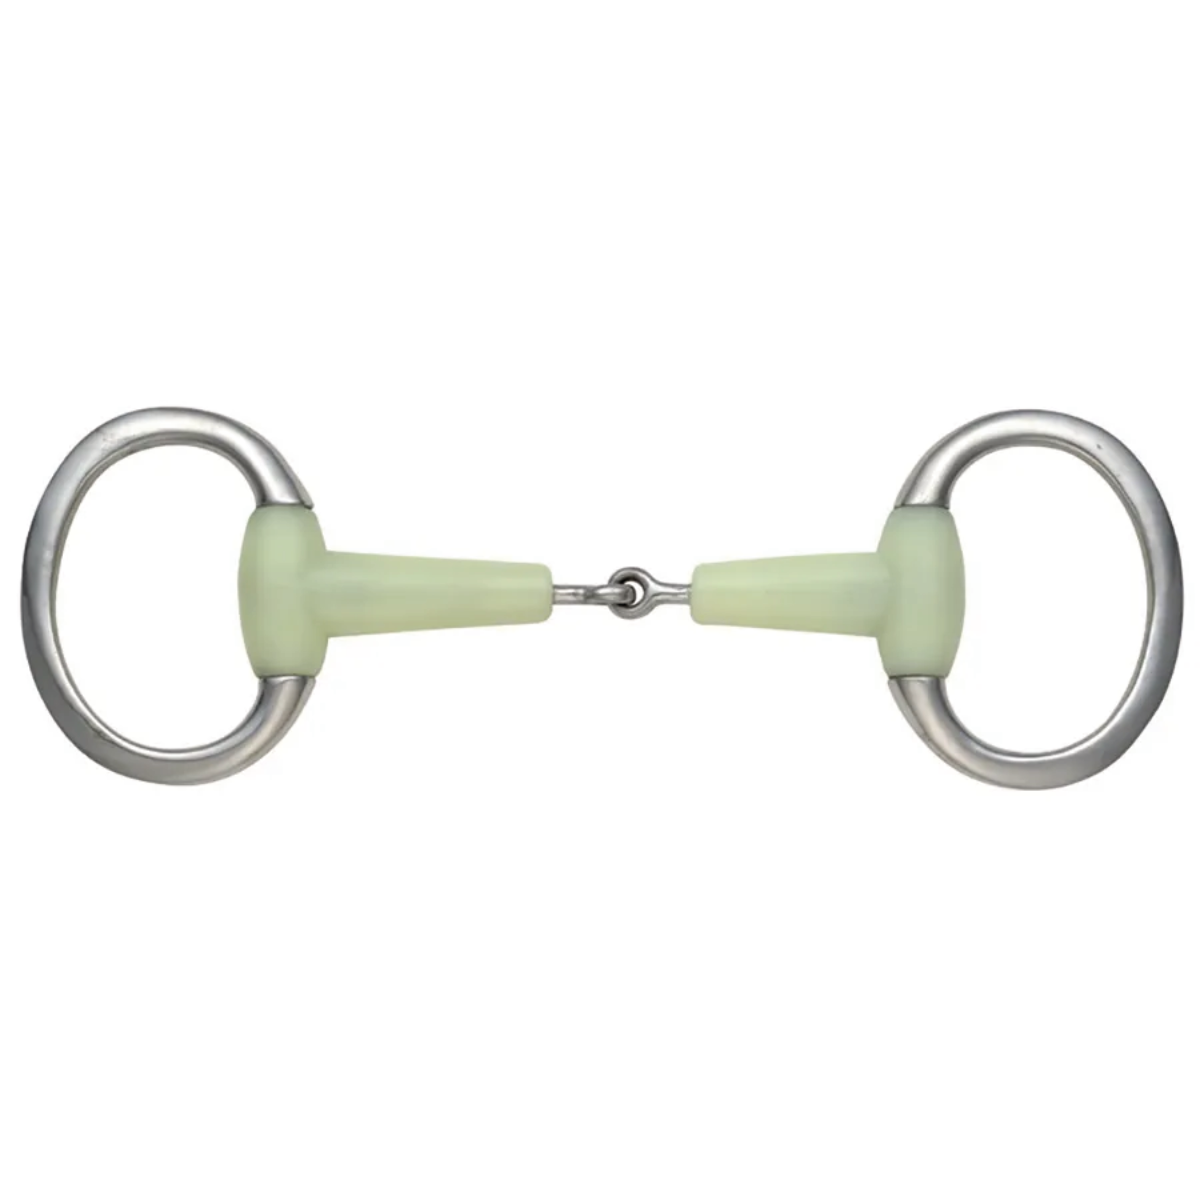 Shires Equikind Single Jointed Eggbutt Snaffle 532